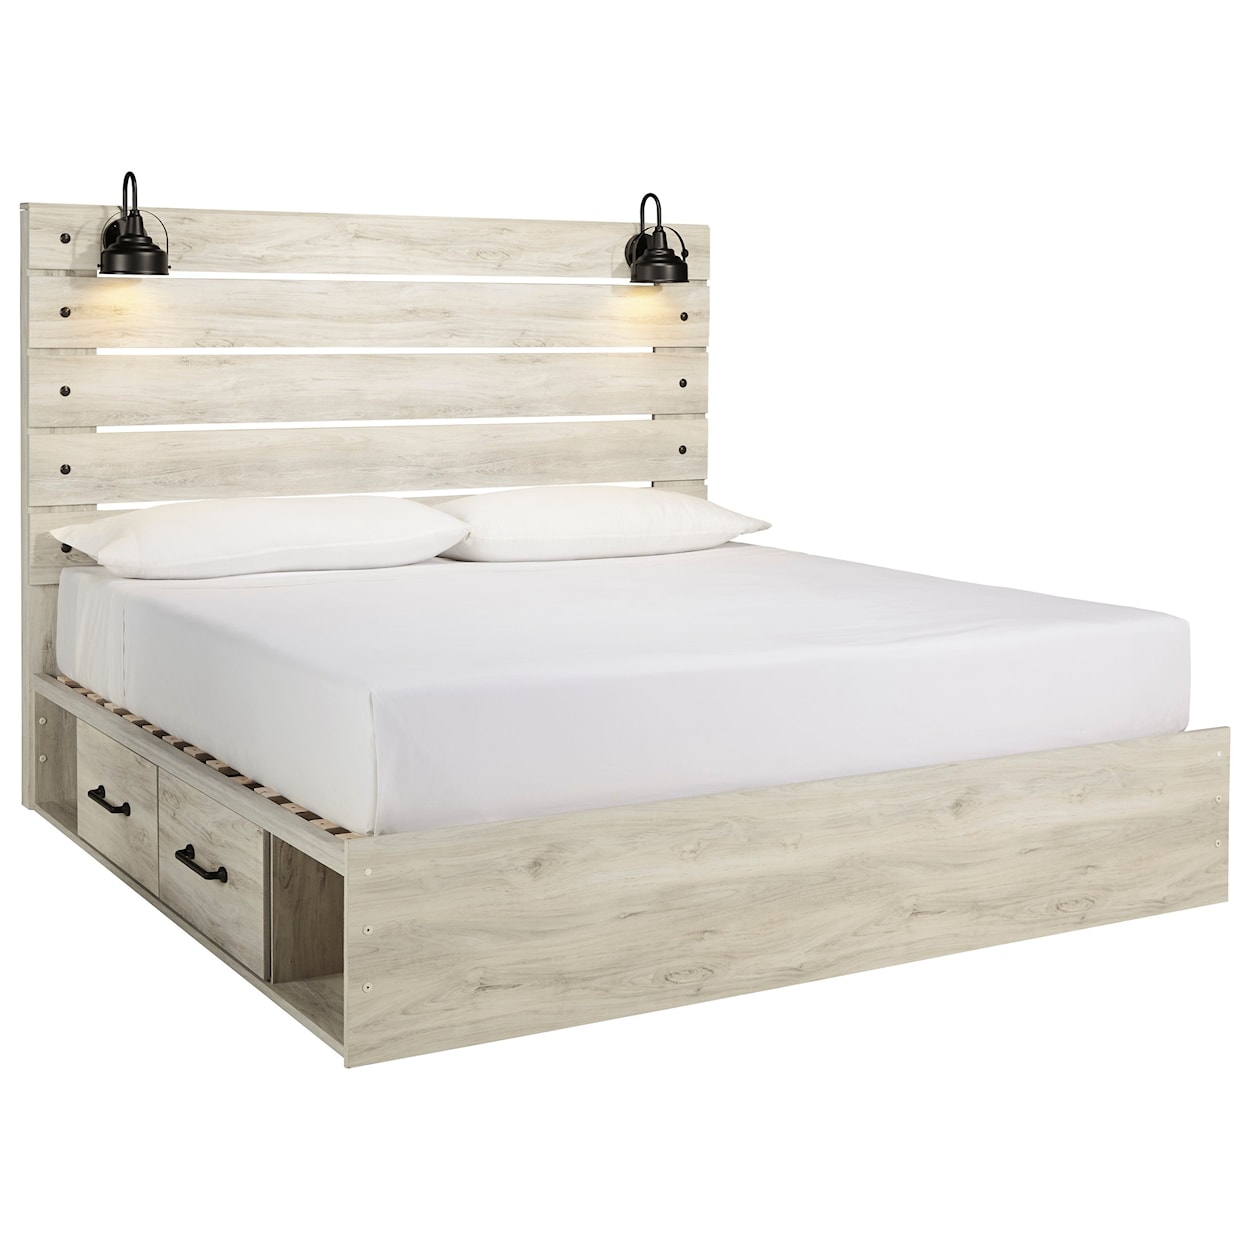 Ashley Signature Design Cambeck King Storage Bed with 4 Drawers